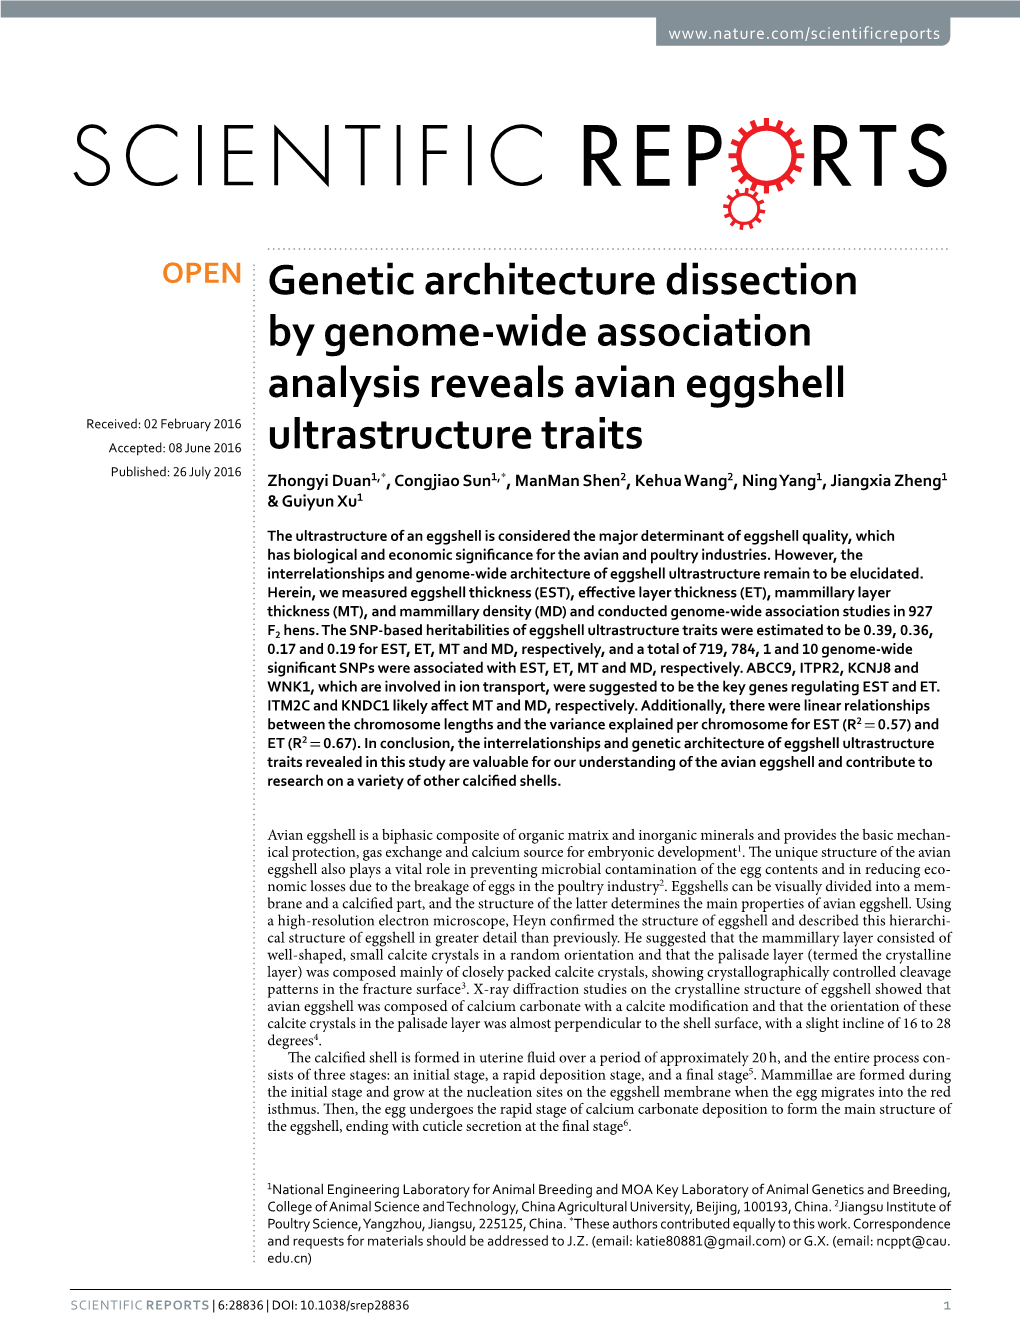 Genetic Architecture Dissection by Genome-Wide Association Analysis